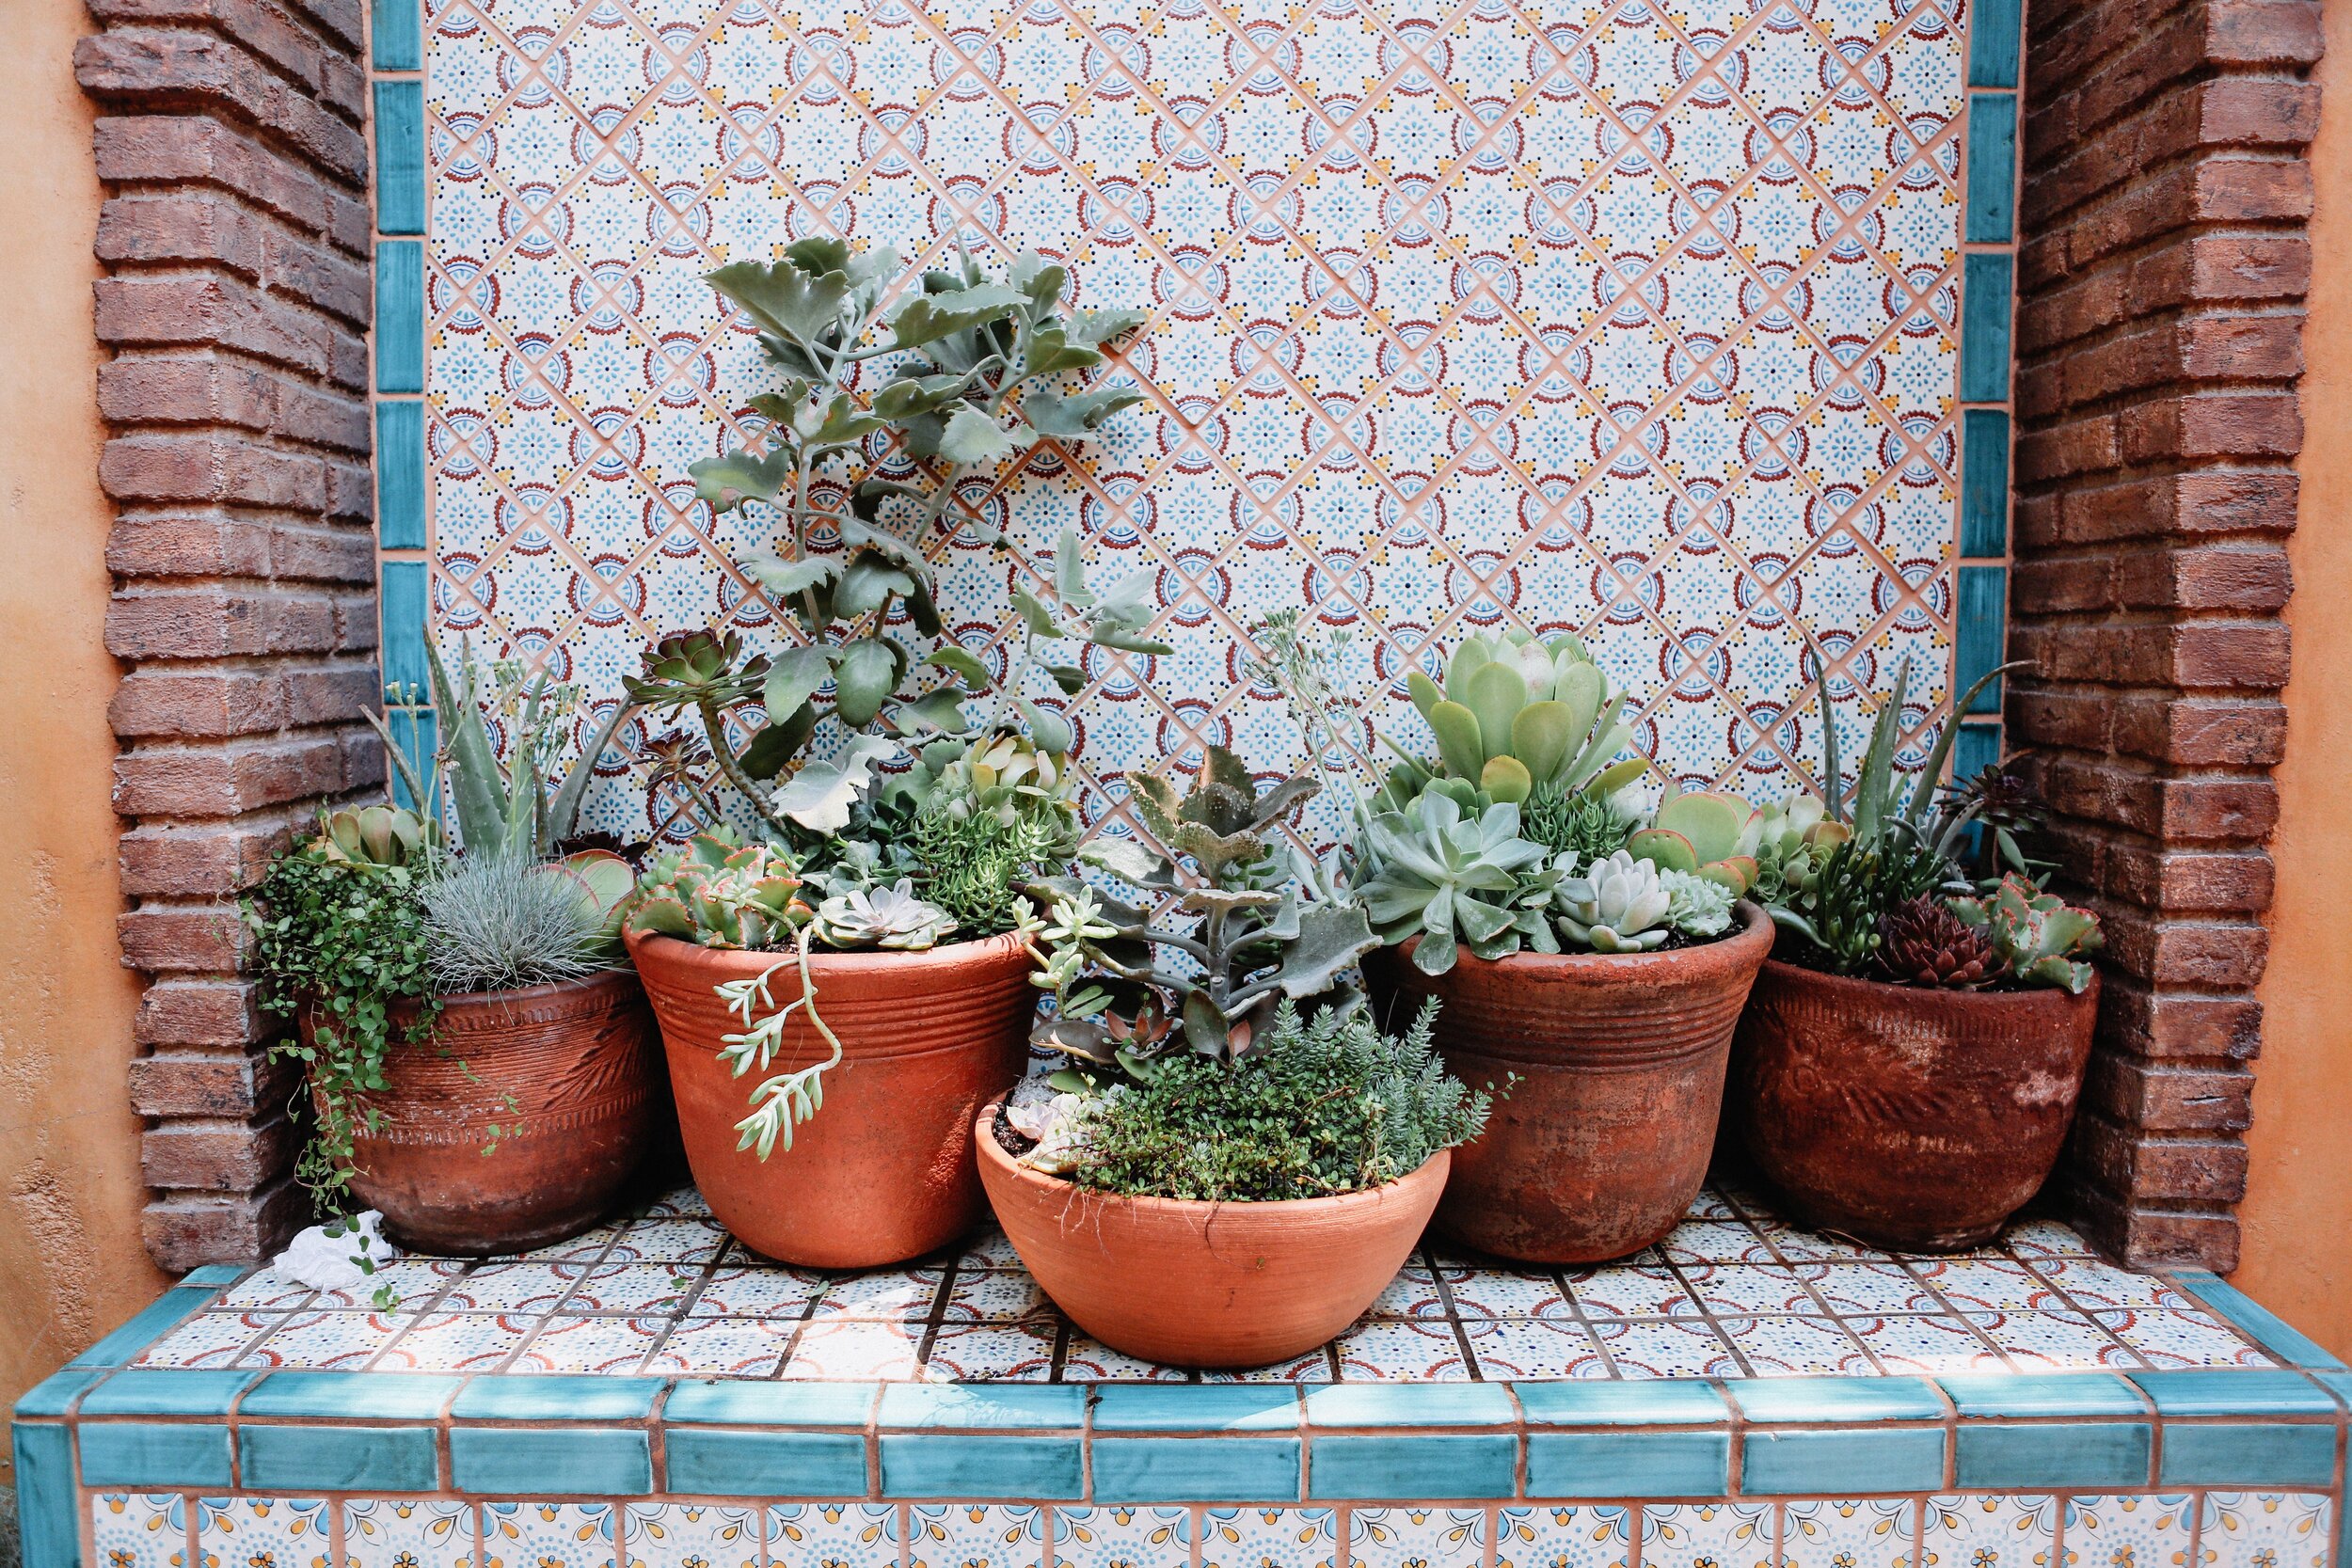 a-variety-of-potted-succulents-in-an-outdoor-patio-garden_t20_8le8bV.jpg